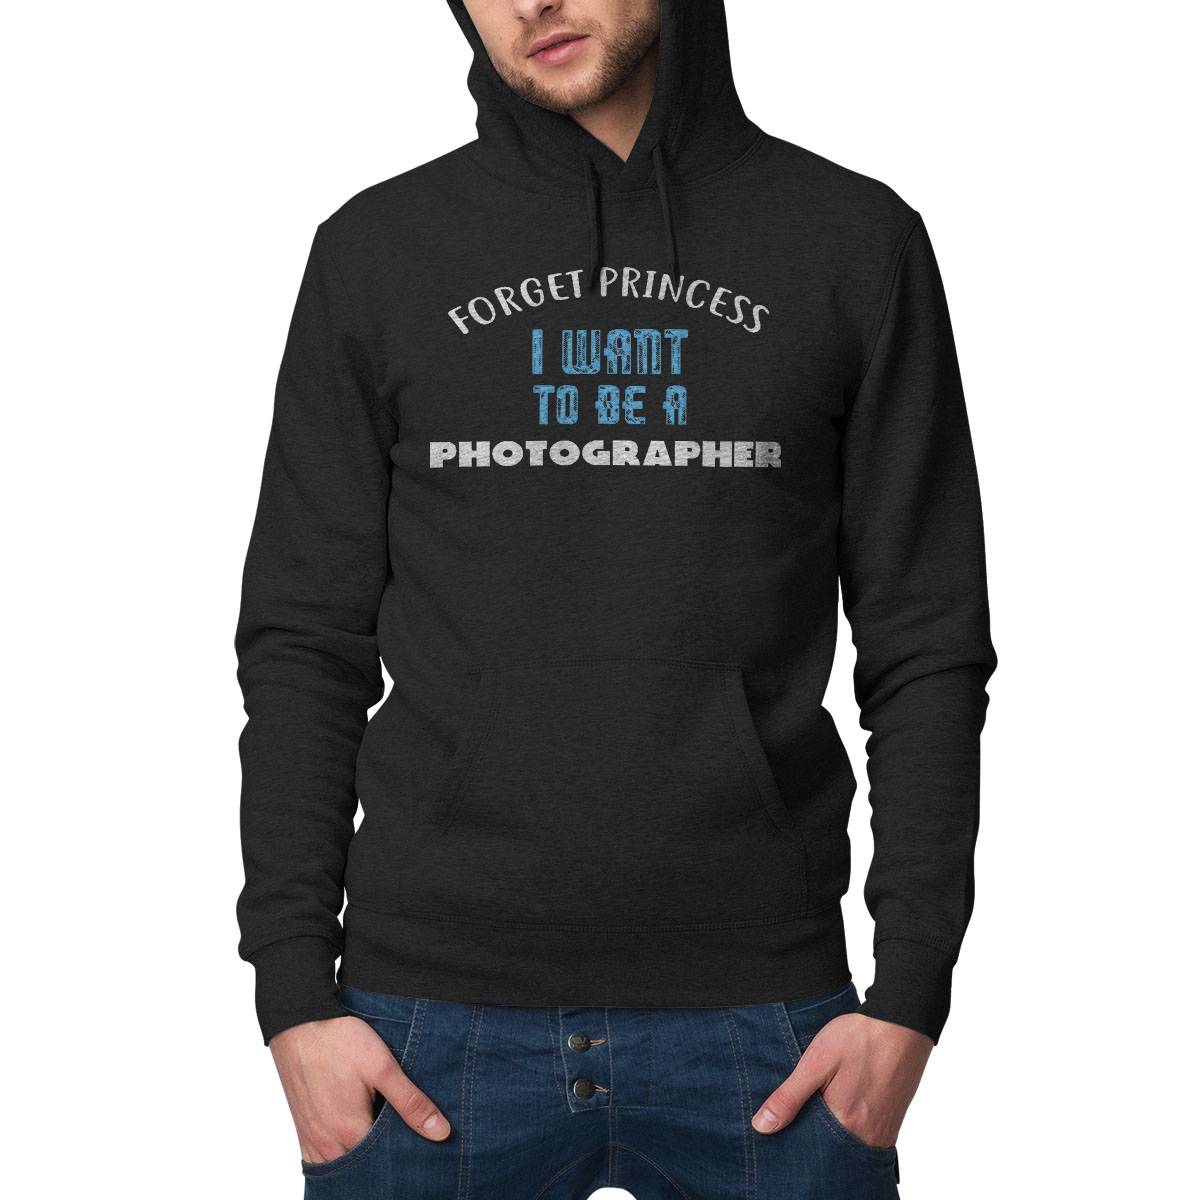 Forget Princess I Want To Be A Photographer T-Shirt